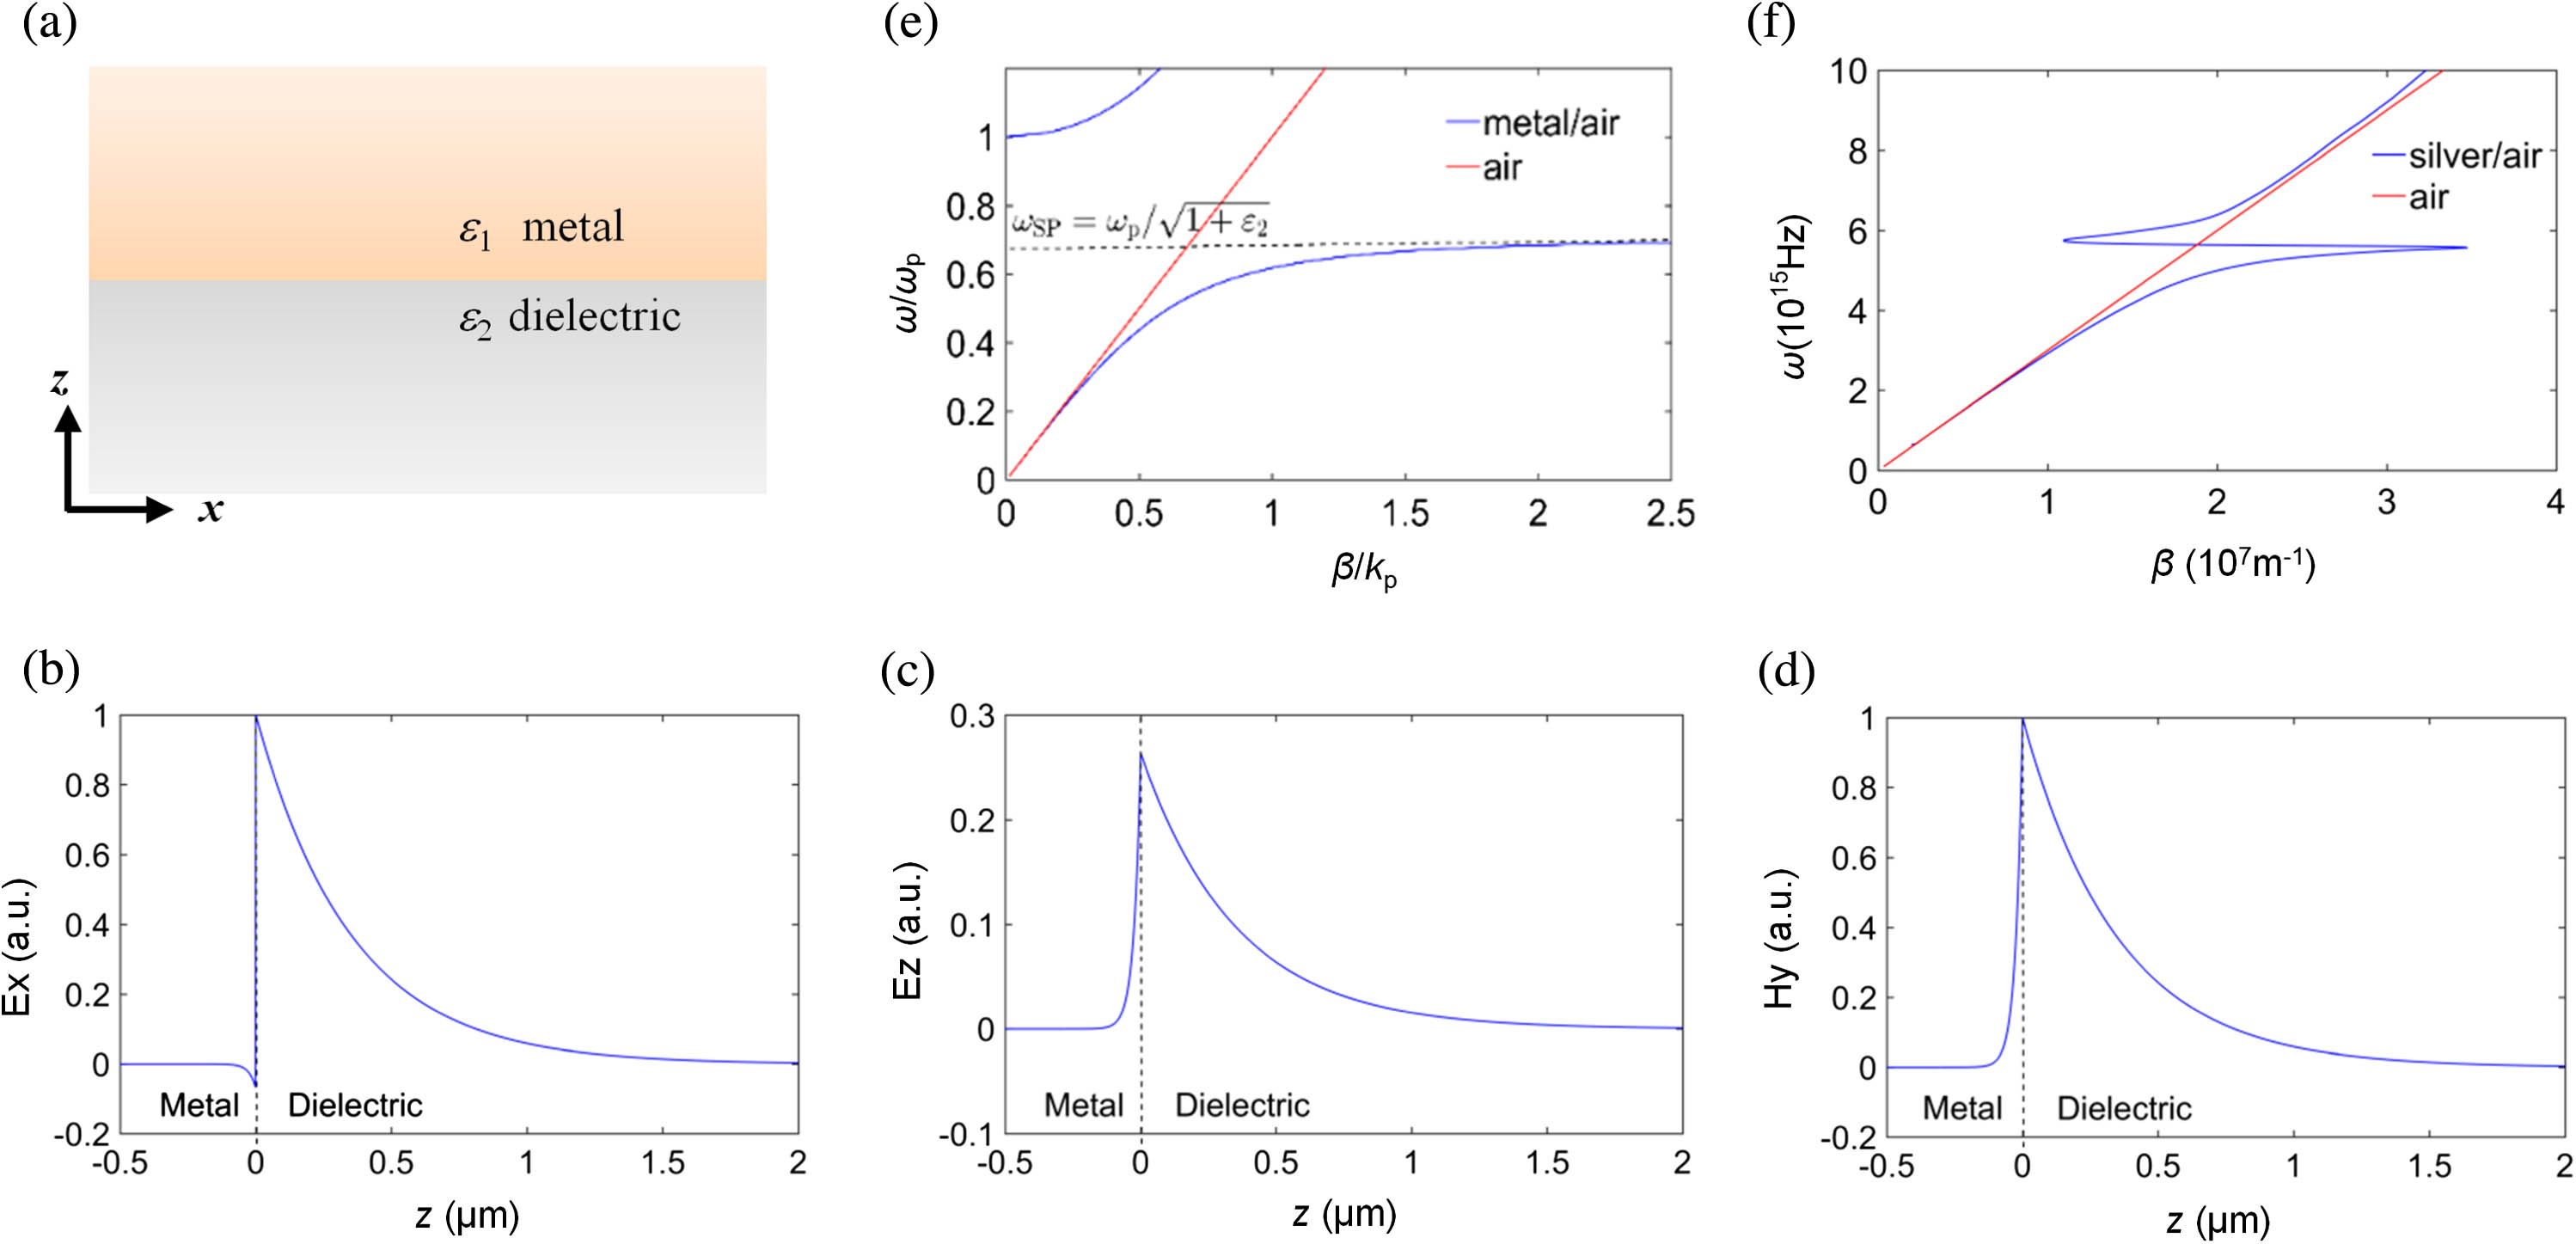 Surface plasmon polaritons (SPPs) characteristics. (a) Metal–dielectric interface with complex permittivities ε1 and ε2, respectively. The interface lies in the x−y plane. (b)–(d) Real parts of Ex, Ez, and Hy transverse-magnetic wave components at a gold–glass interface (with ε1=−25+1.44i, and n2 =1.32, respectively), and an incident wavelength of λ=800 nm. (e) Real part of SPP dispersion relation ω(β) (blue line) for lossless metal, i.e., ε1∈R. The angular frequency is normalized to the plasma frequency ωp. The SPP’s propagation constant β is normalized to kp=ωp/c. For increasing propagation constant, the angular frequency approaches the surface plasmon frequency ωSP=ωp/1+ε2. The light curve in air is shown as the red line. (f) Real part of SPP dispersion relation at a silver–air interface (blue line). Here, ohmic loss is included, which causes the dispersion relation to “bend back” across the light line (red line).